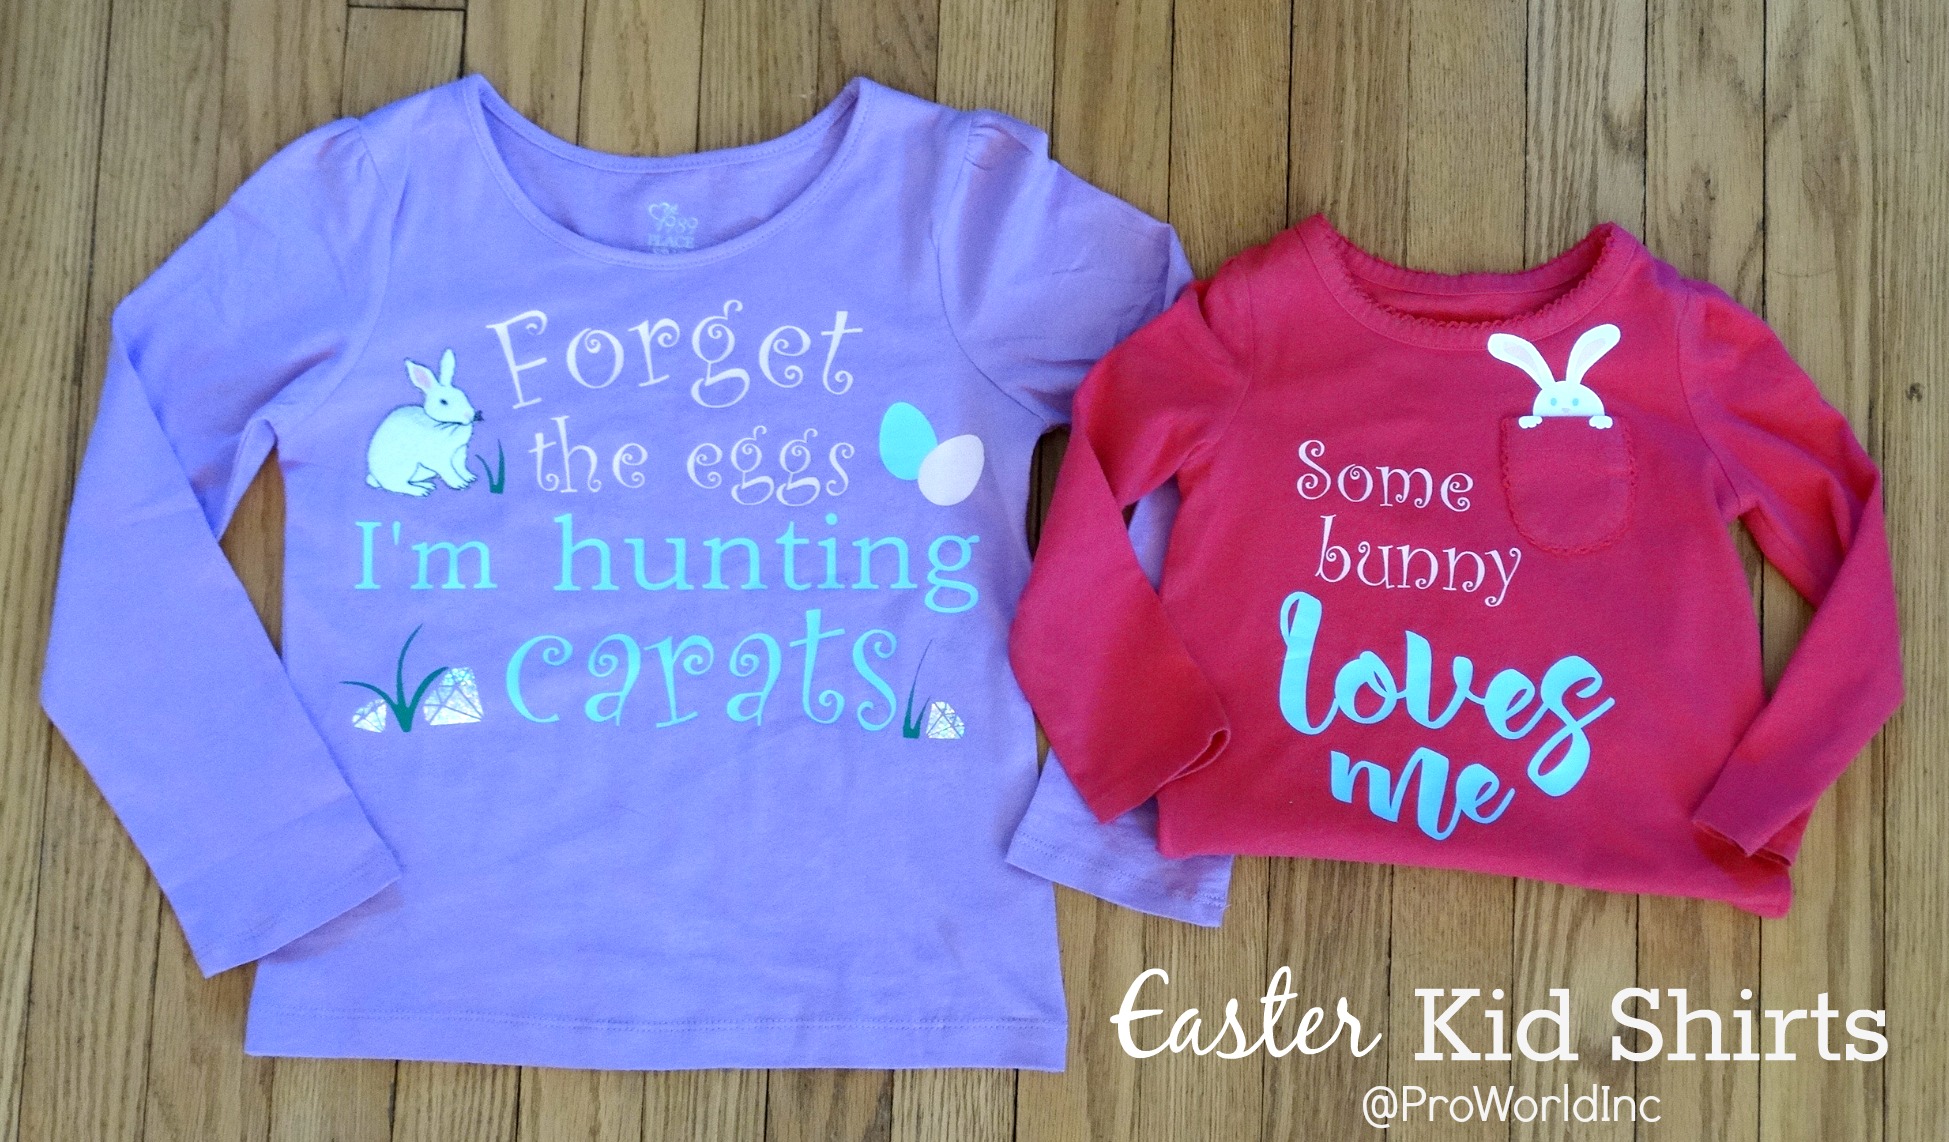 Some bunny loves you easter shirt